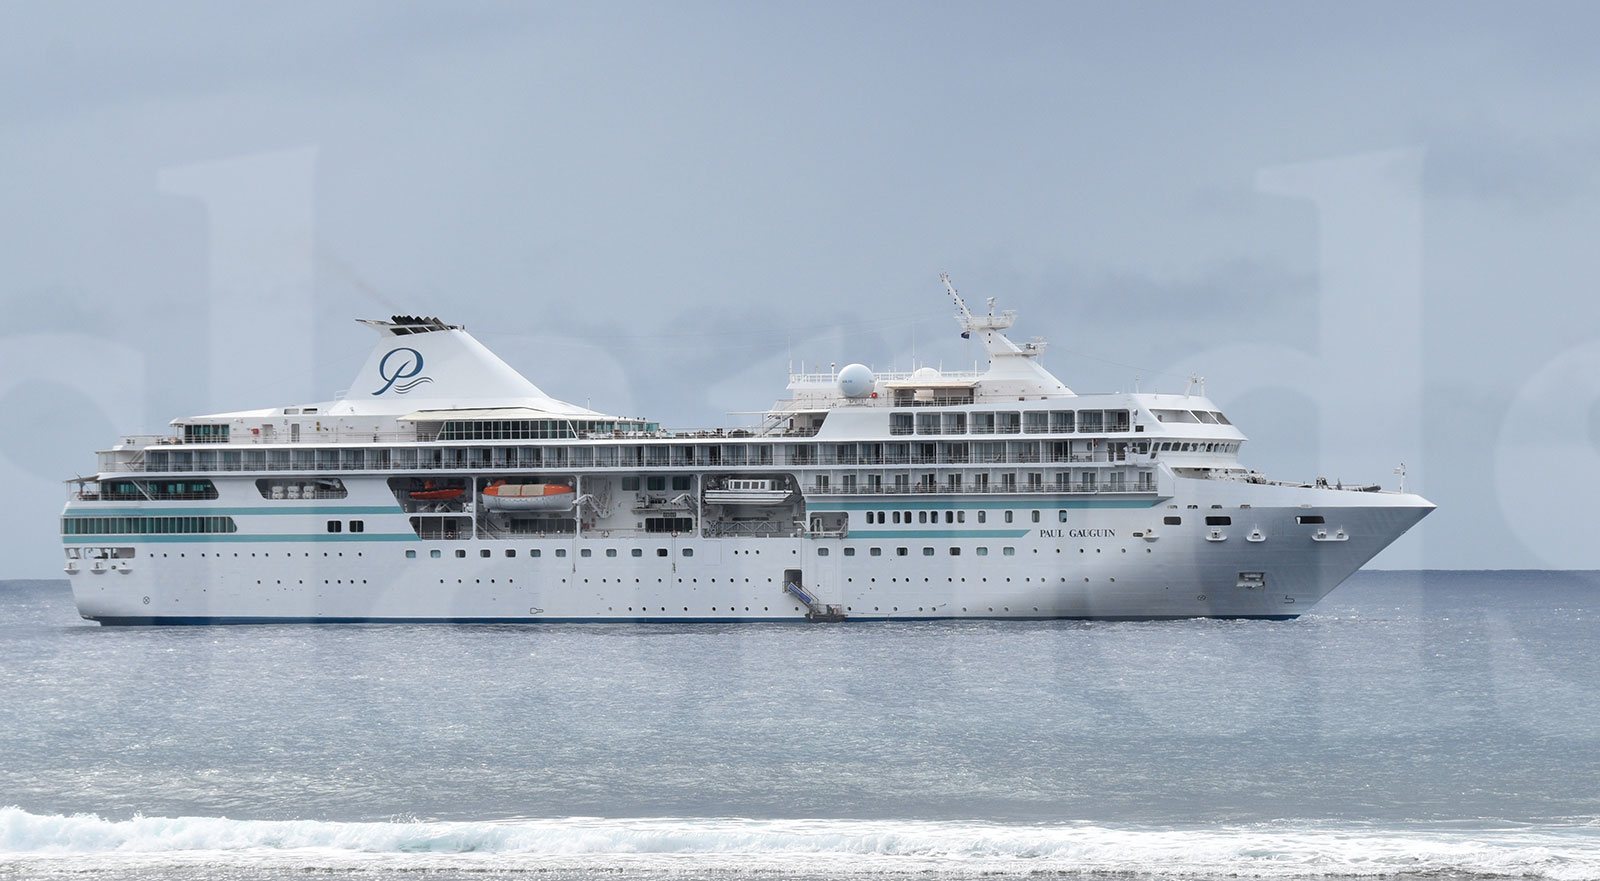 More cruise ships expected in Raro as visitor numbers swell